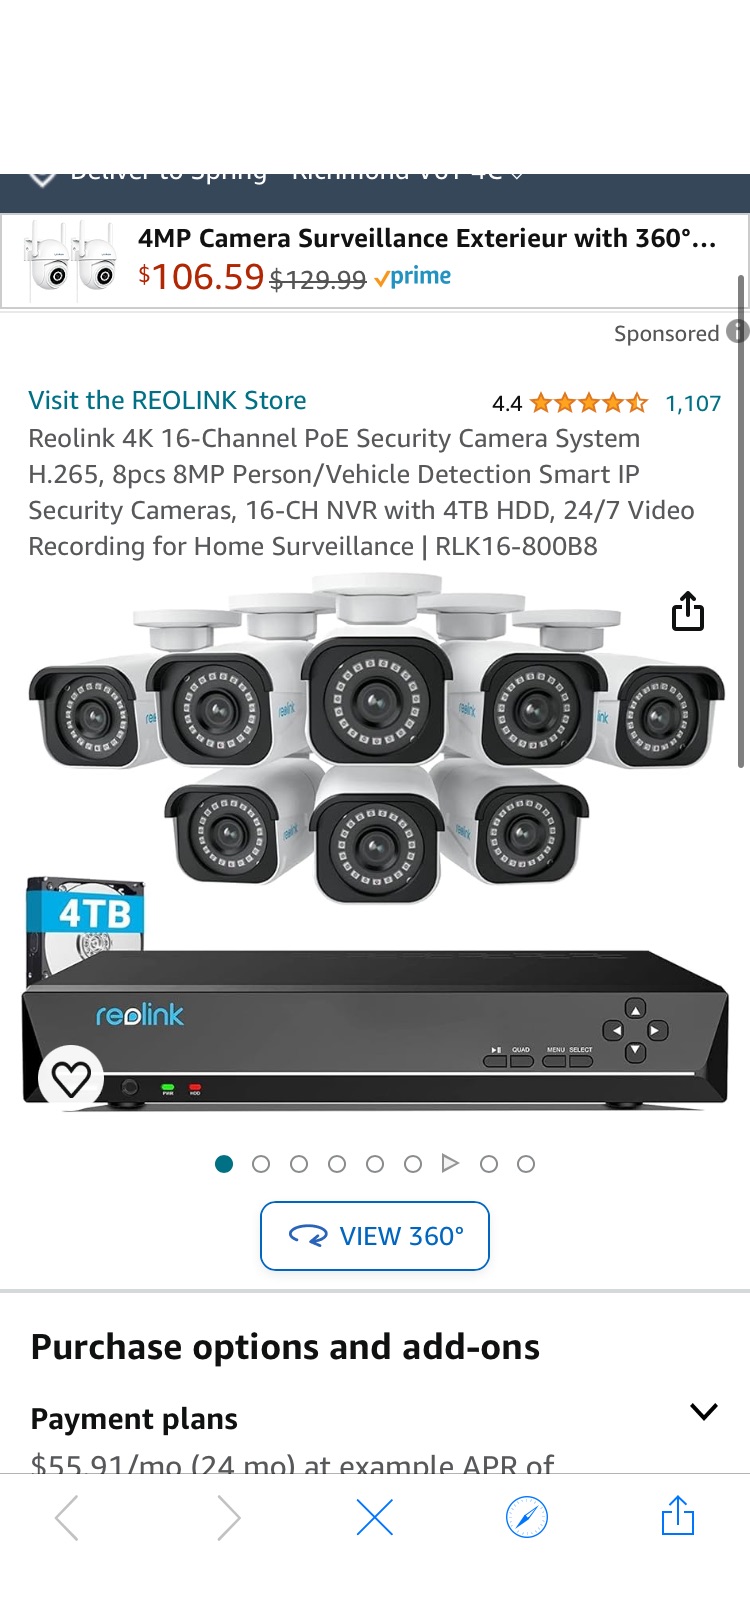 Reolink 4K 16-Channel PoE Security Camera System H.265, 8pcs 8MP Person/Vehicle Detection Smart IP Security Cameras, 16-CH NVR with 4TB HDD, 24/7 Video Recording for Home Surveillance | RLK16-800B8 : 